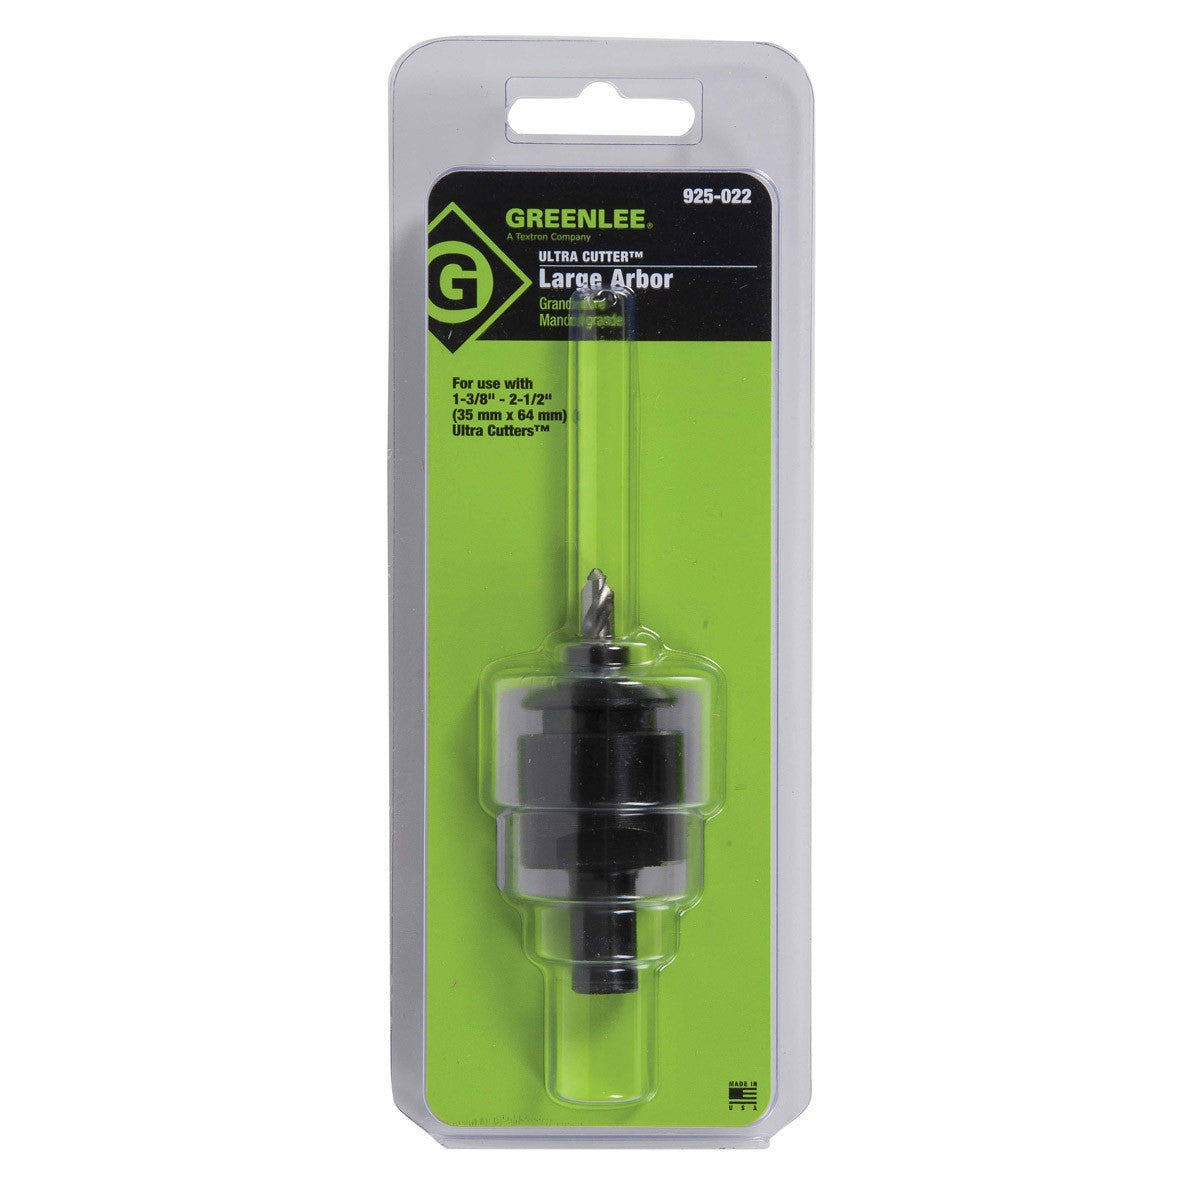 Greenlee 925-022 Large Arbor with Pilot drill for 1-3/8" to 2-1/2" Size Cutter